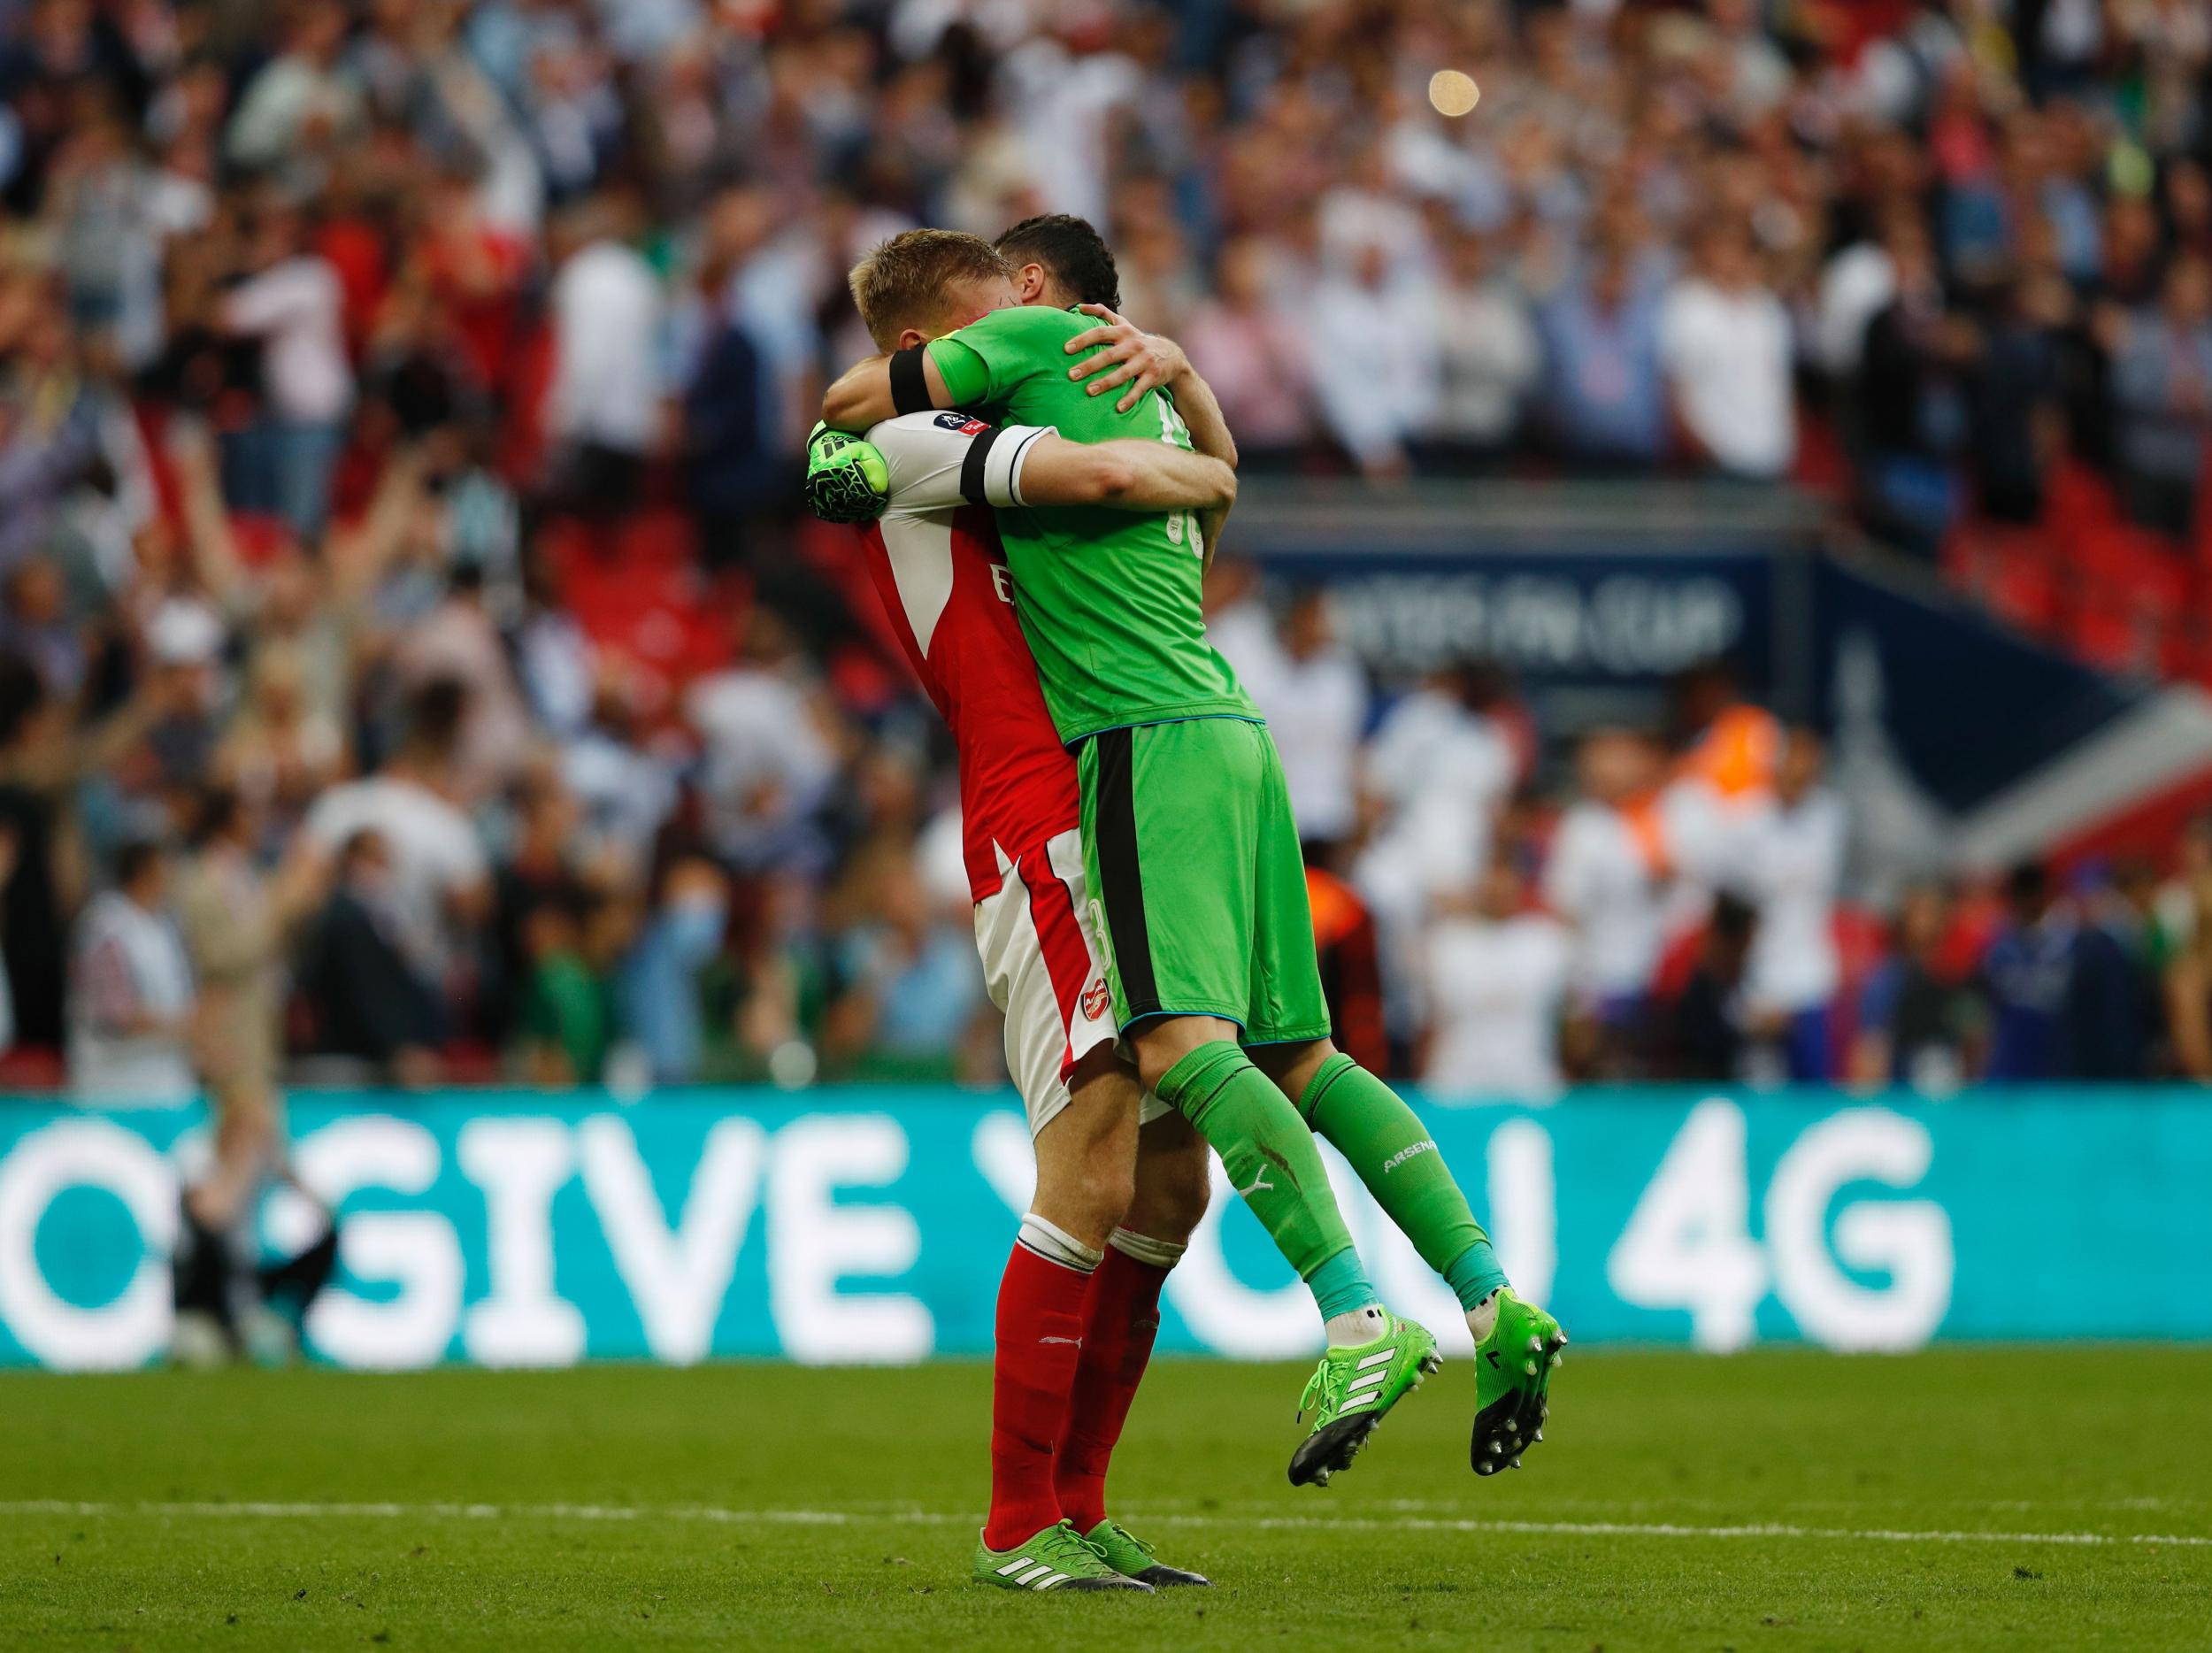 Mertesacker and Ospina embrace at the full-time whistle